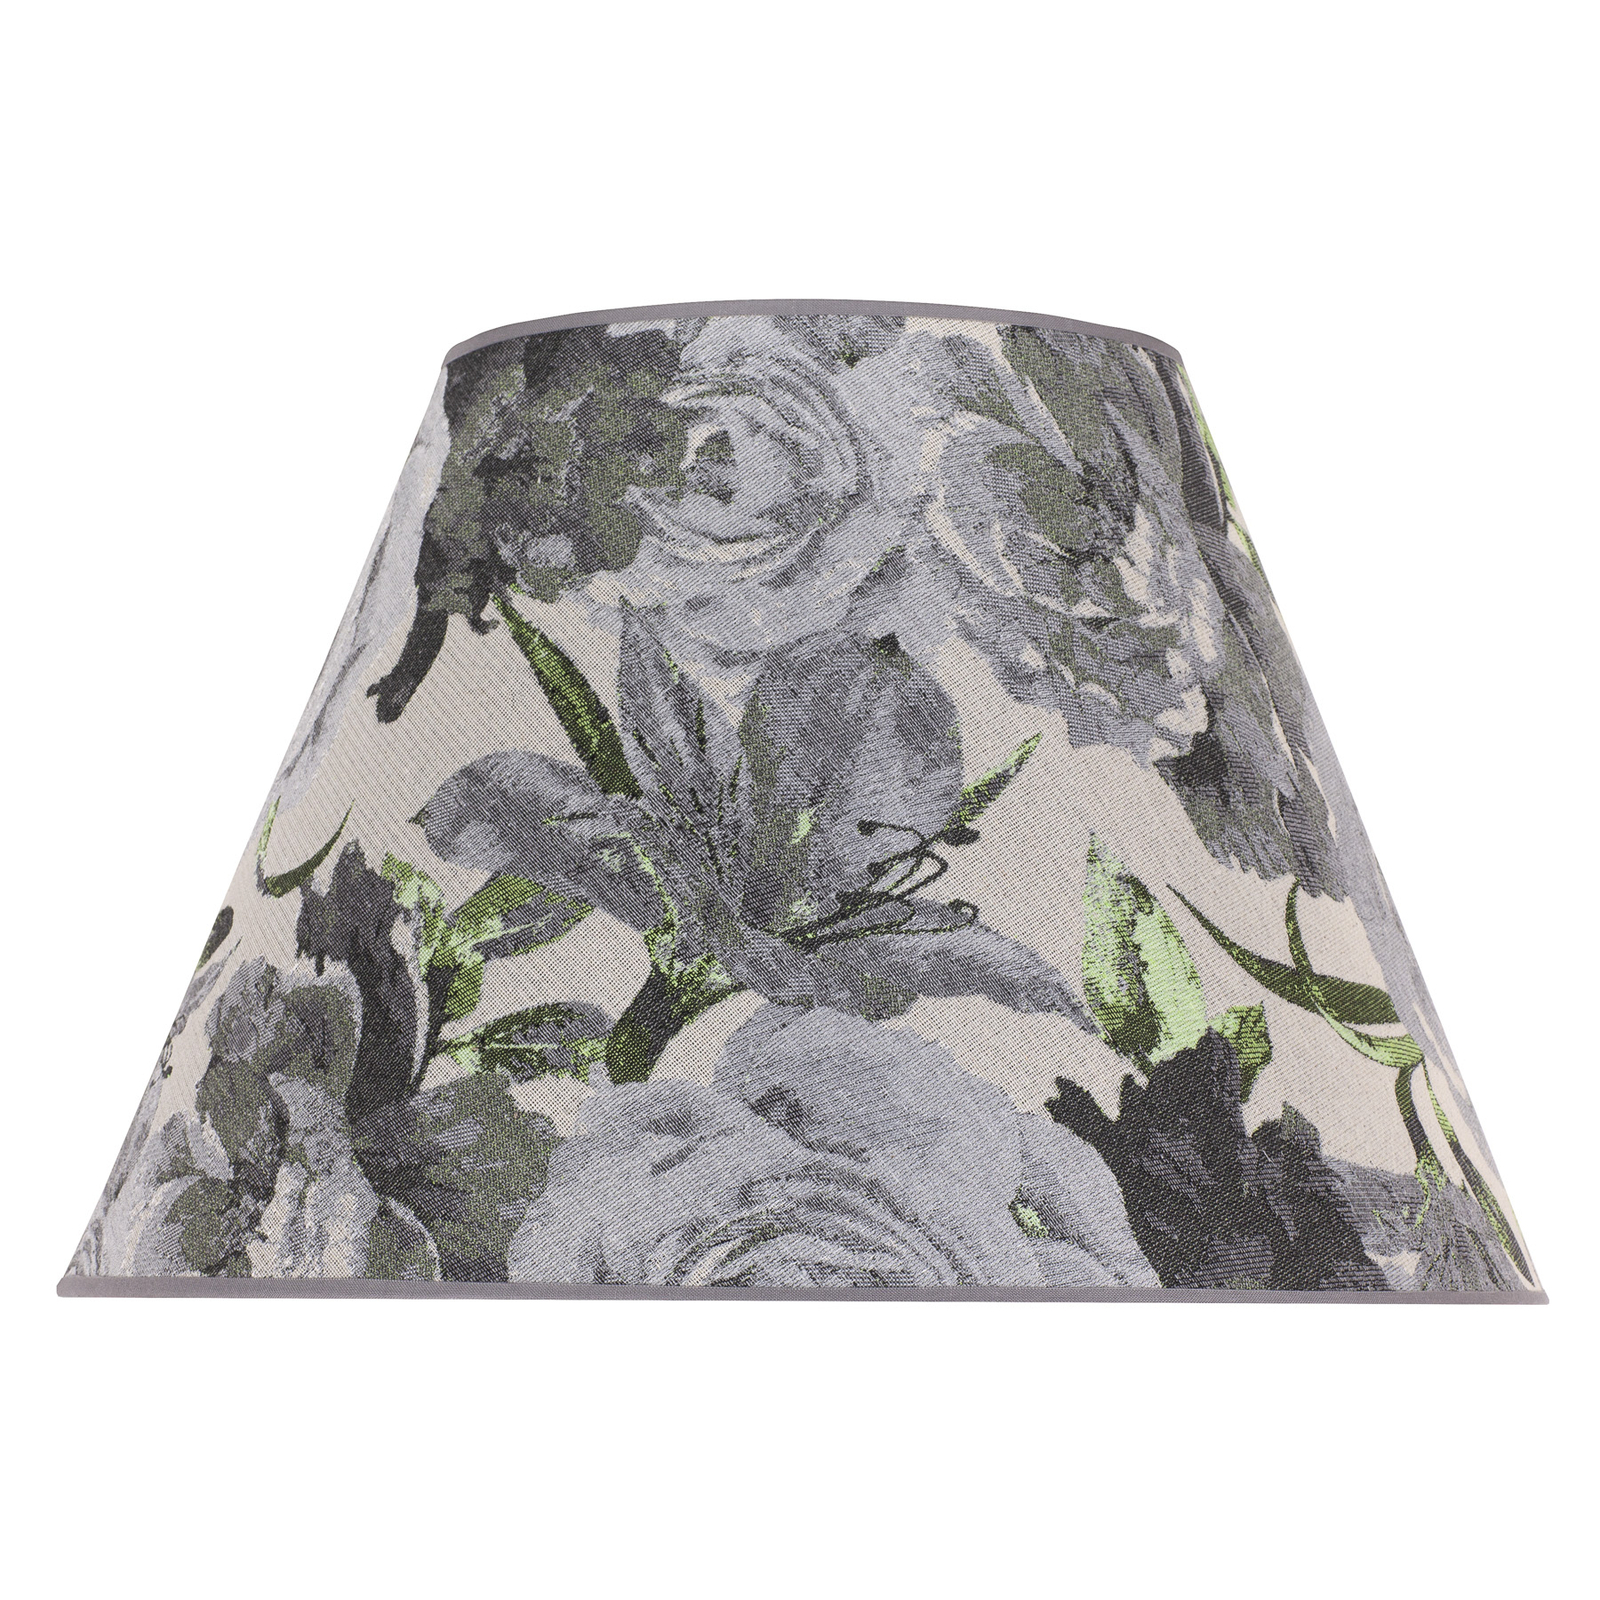 Sofia lampshade height 21 cm, floral pattern grey